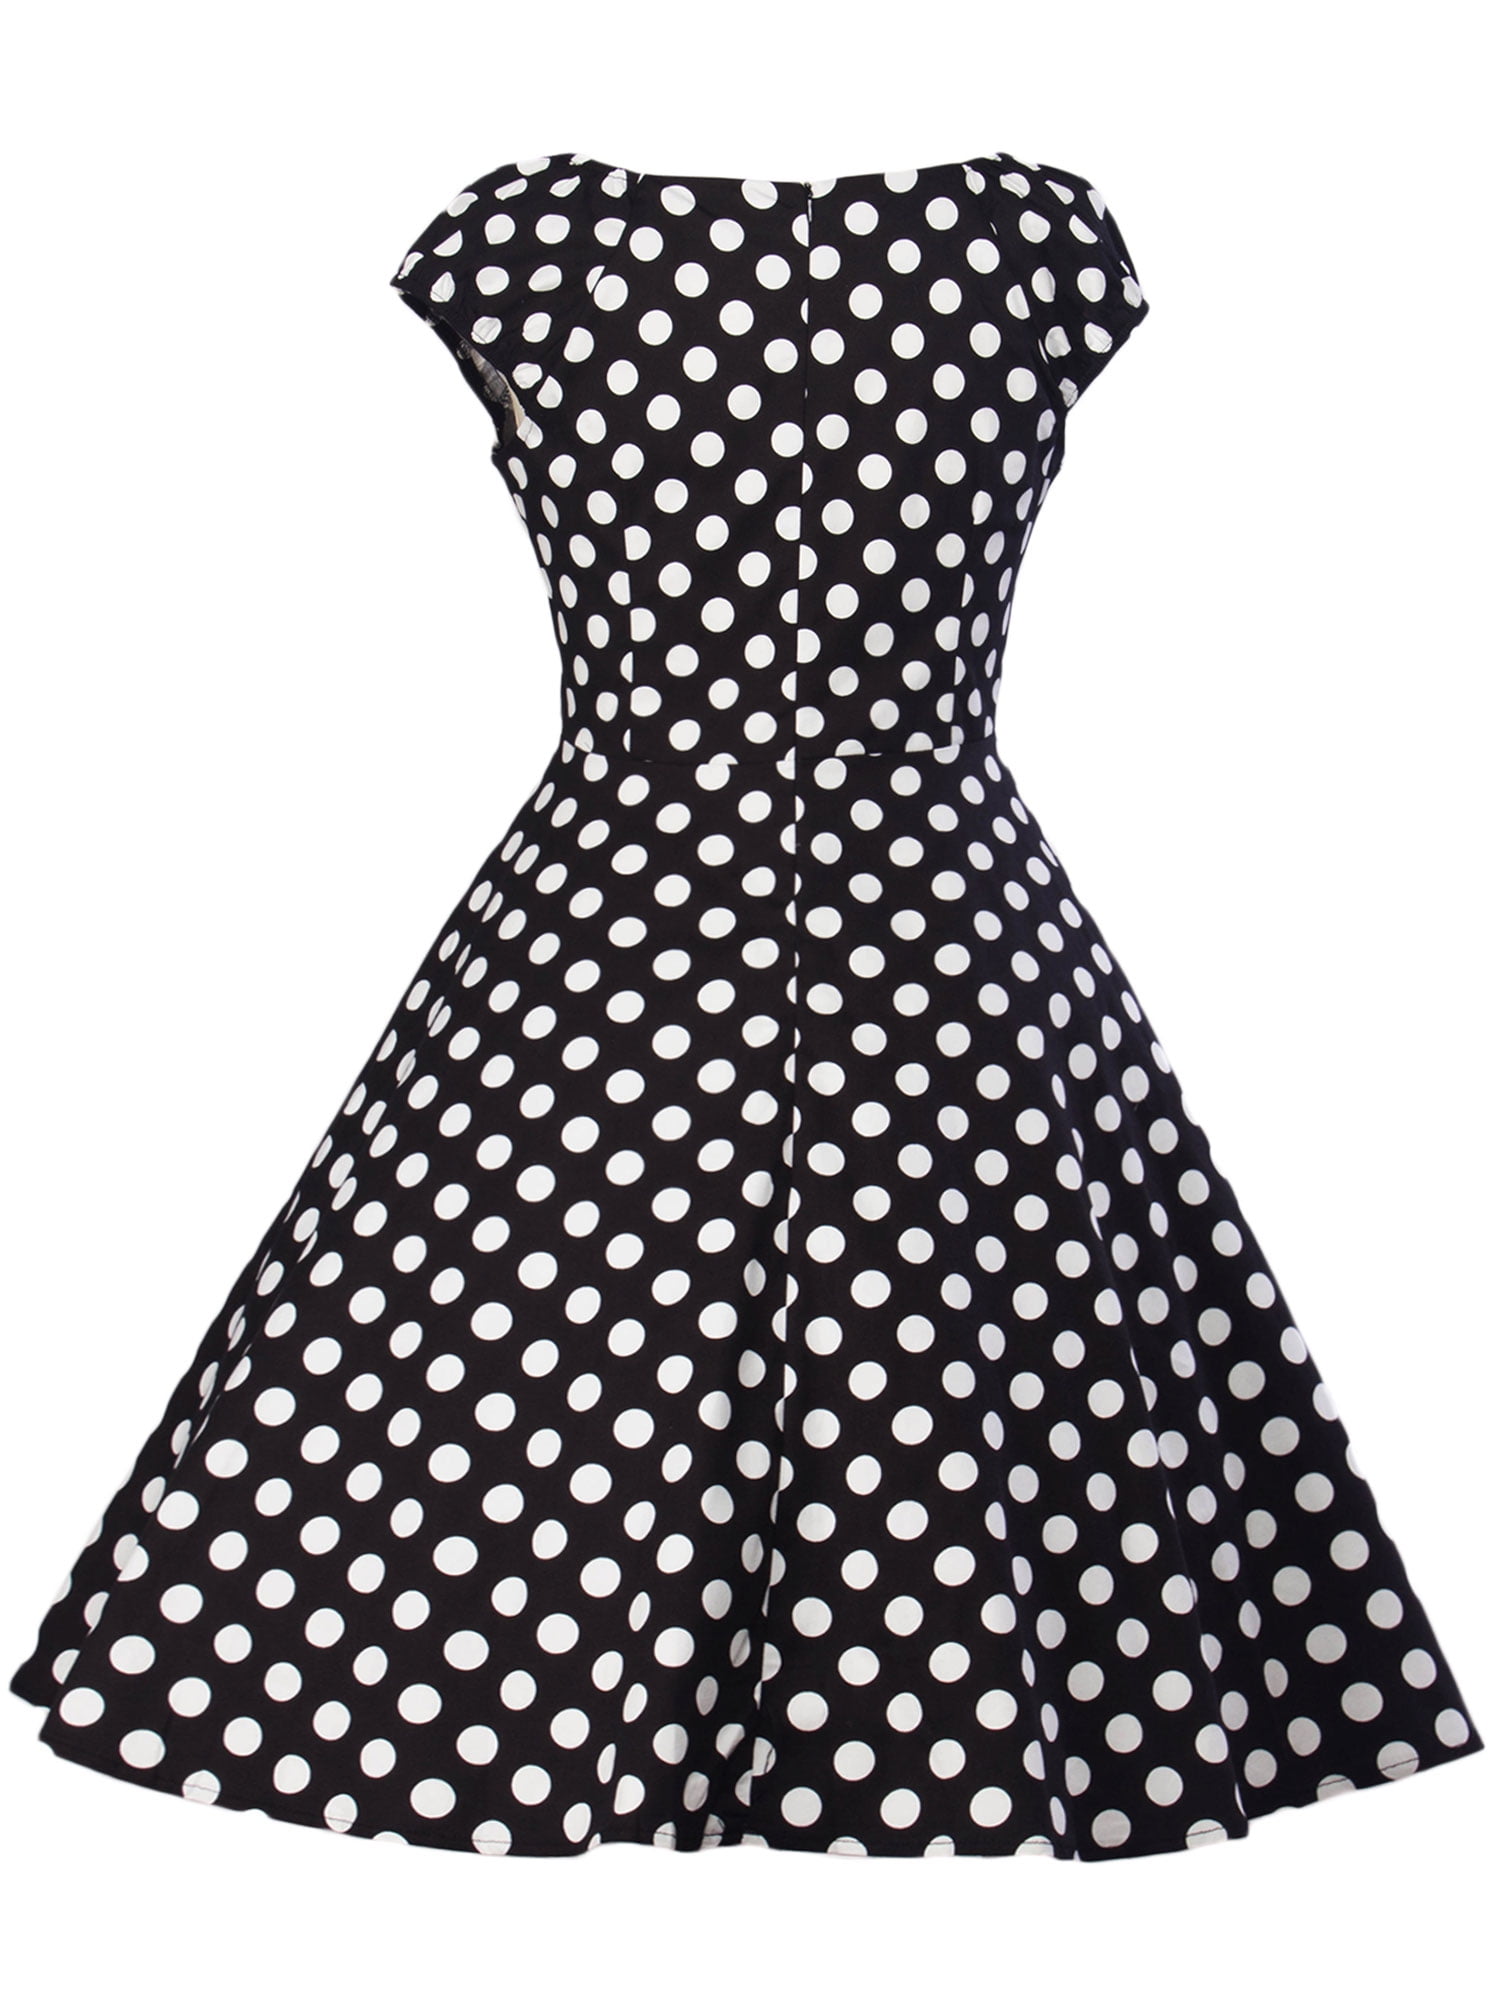 Summer Vintage 50s 60s Style Retro Rockabilly Pinup Polka Dot Party Dress Ball 